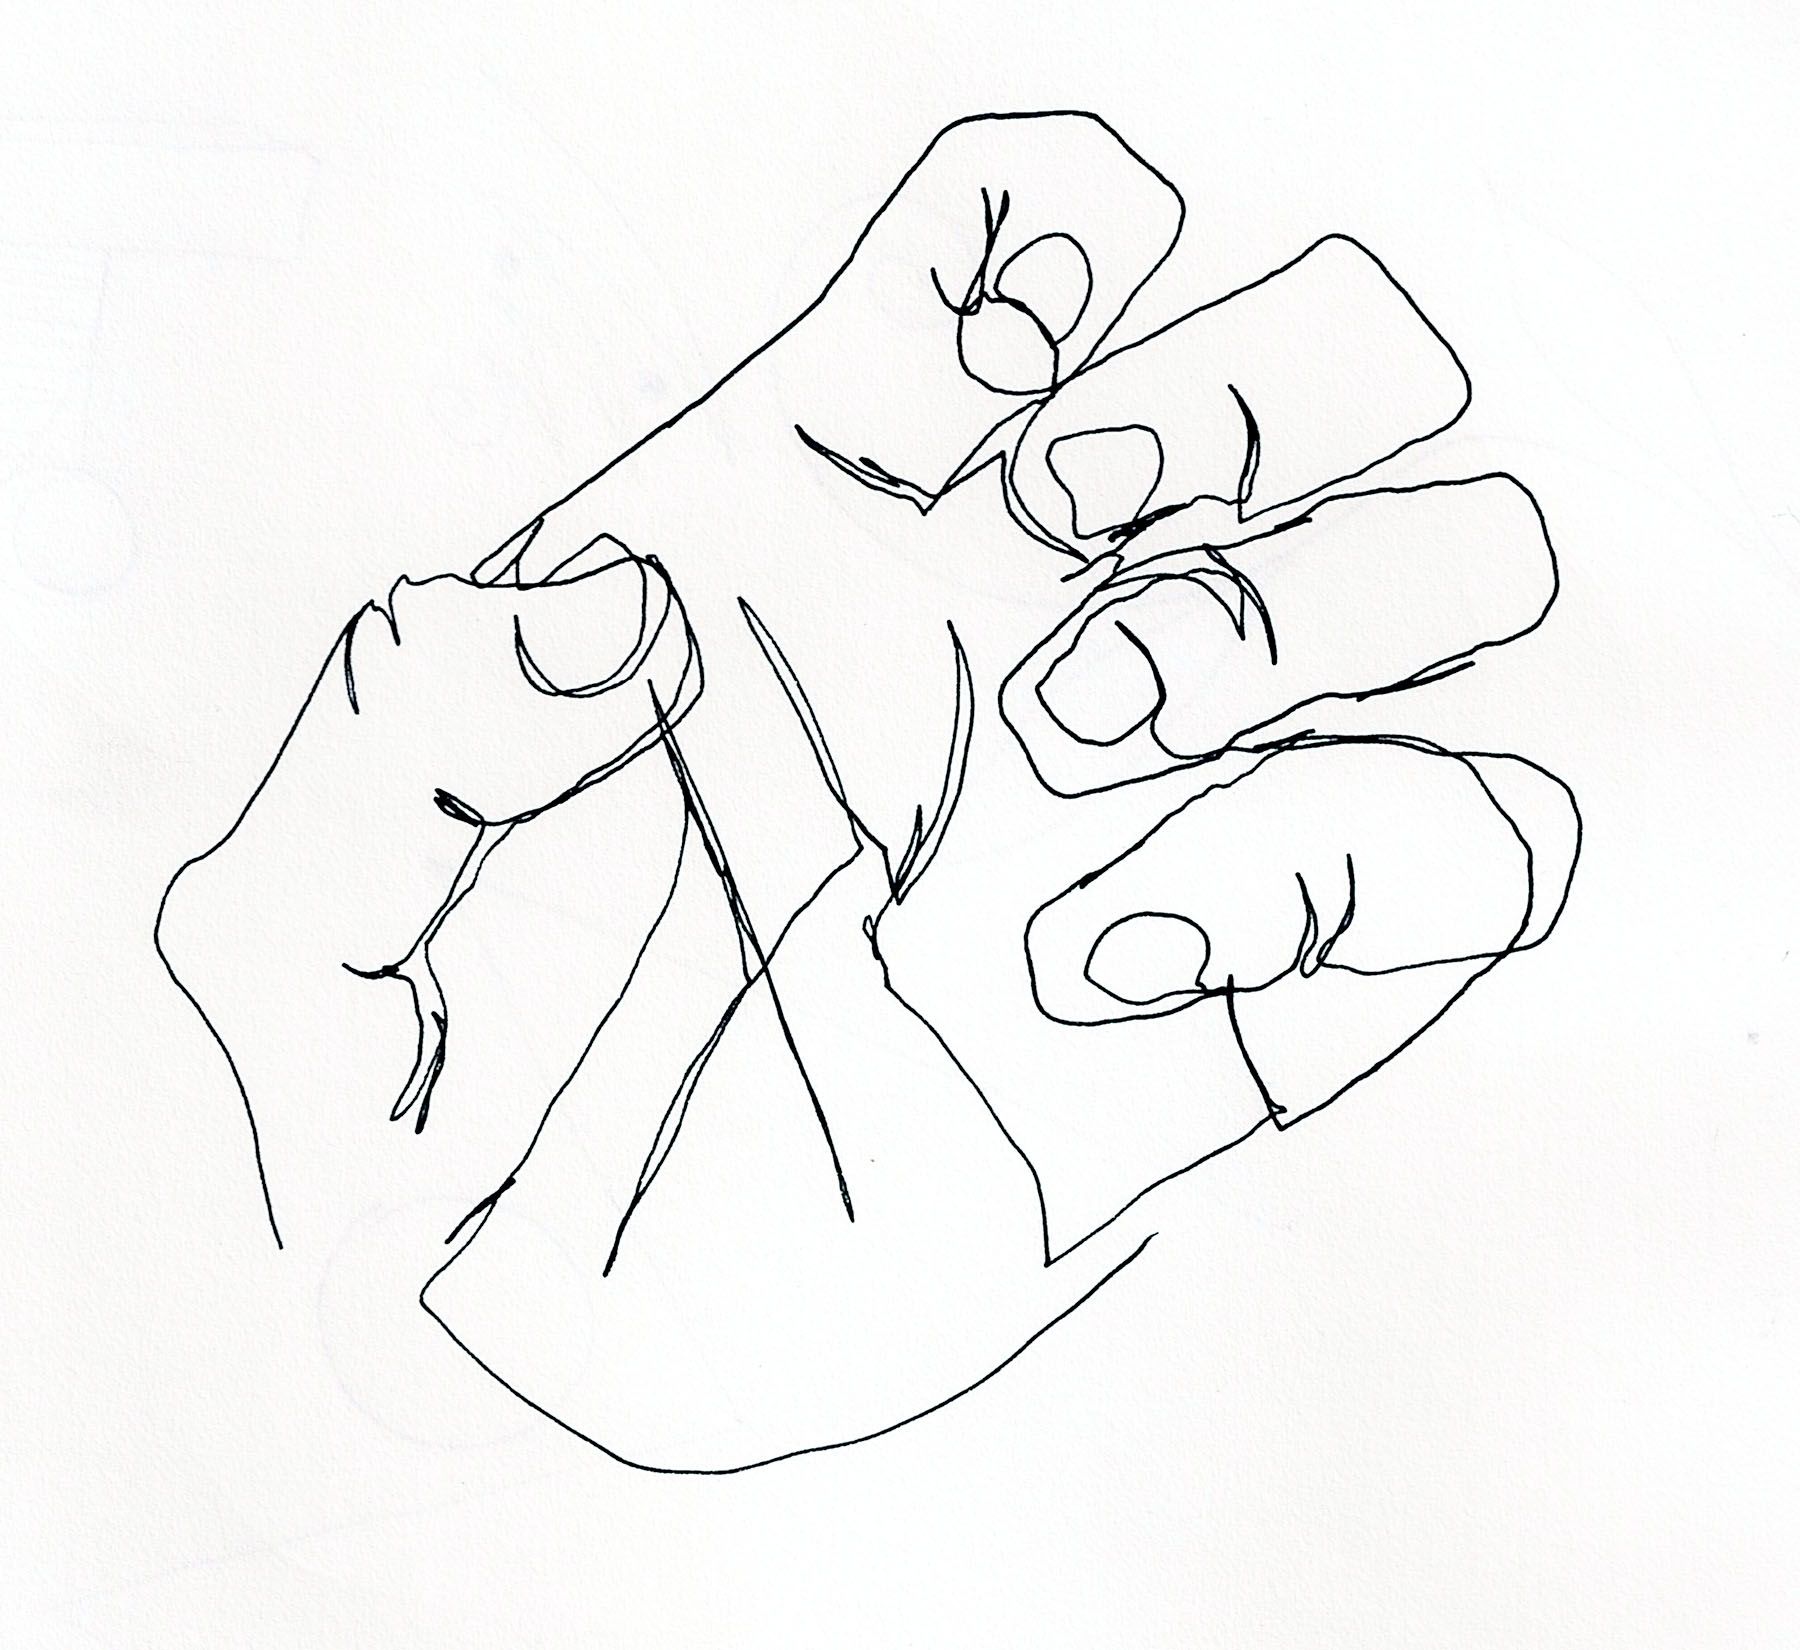 Contour Hands Drawing Images